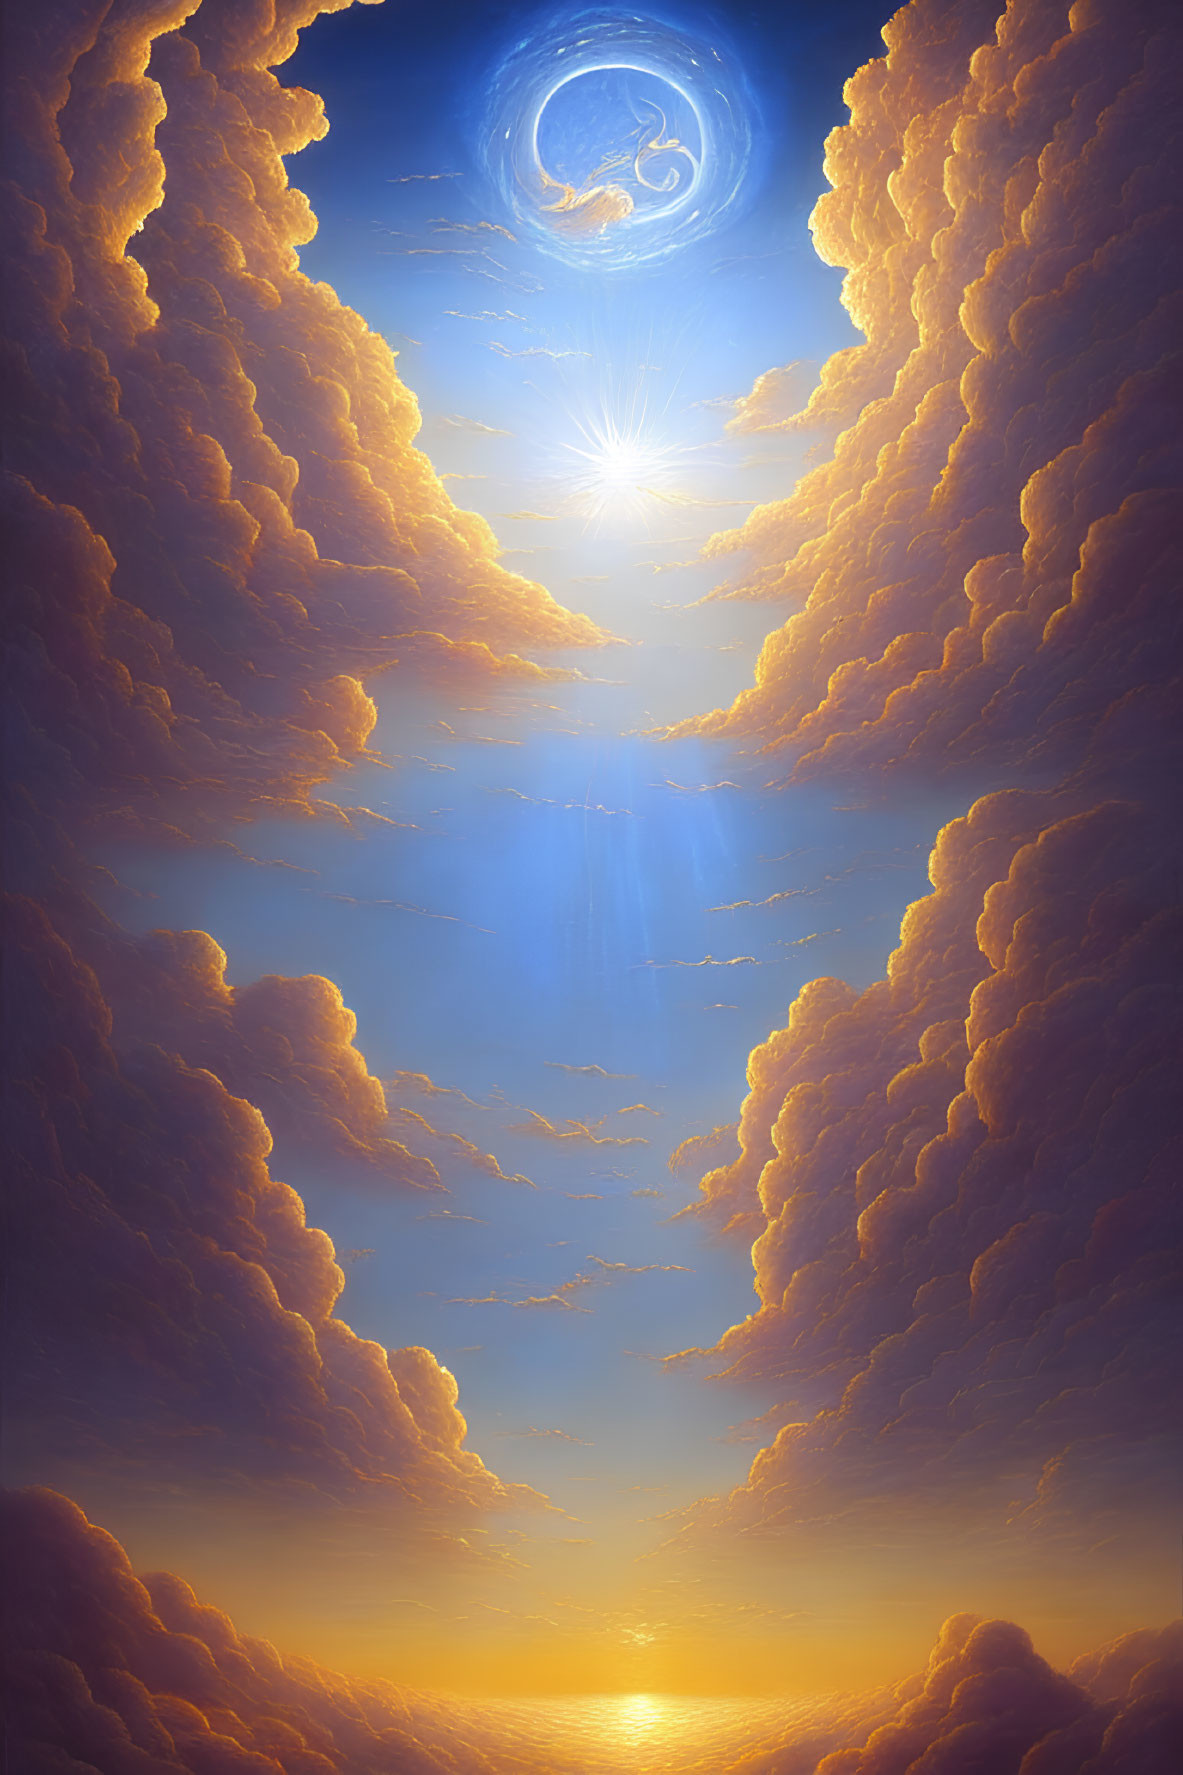 Celestial scene with sunbeams, fluffy clouds, and starry gate